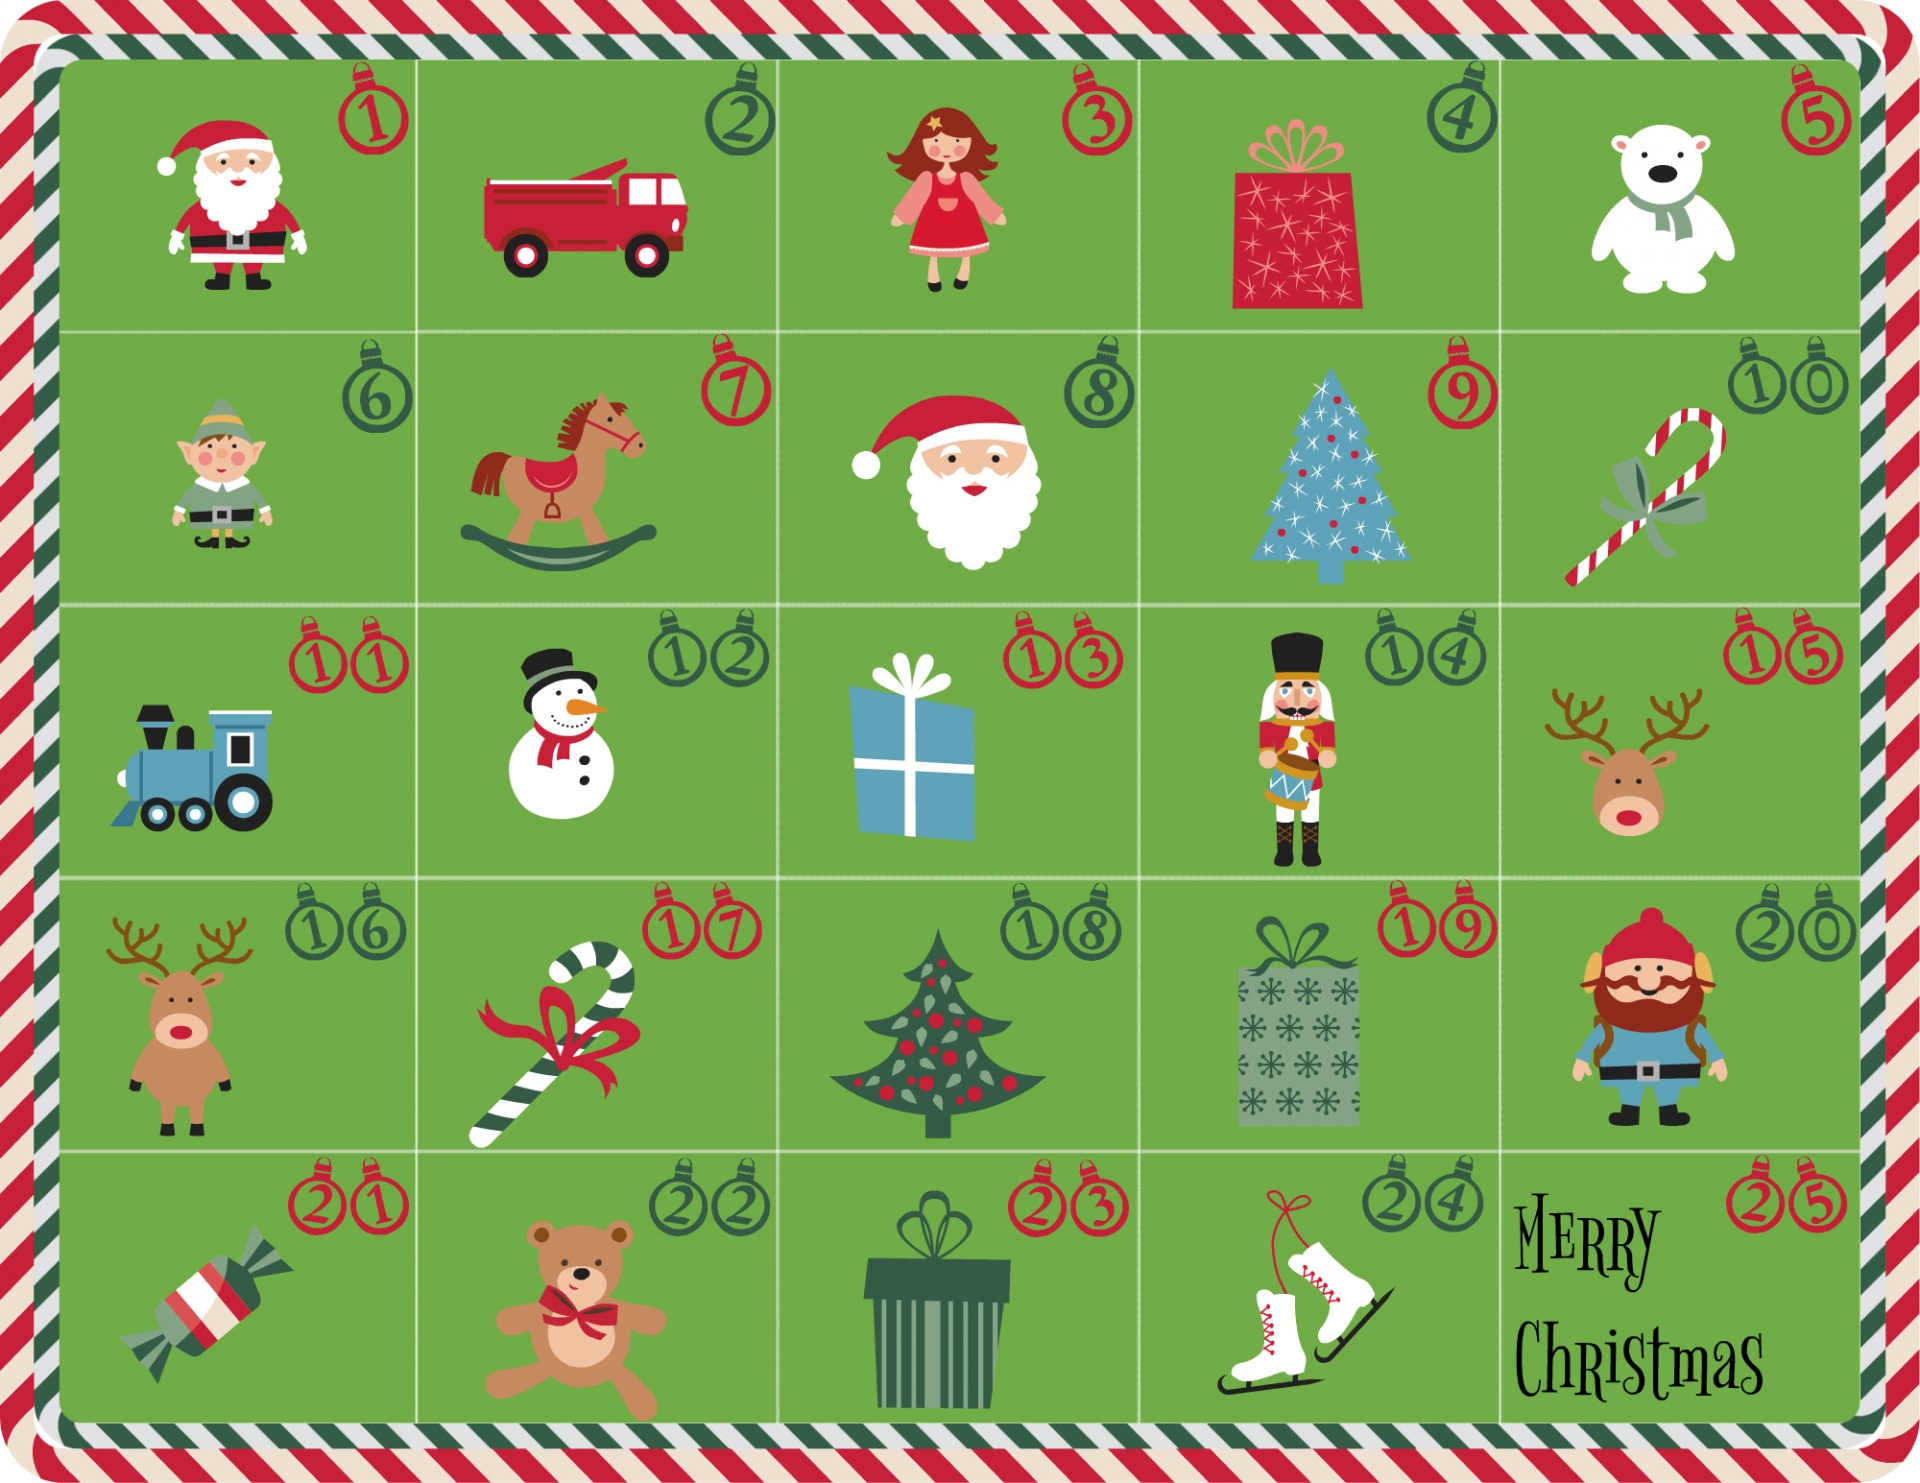 Advent Calendar featuring assorted Christmas illustrations on a green background with dates in ornaments